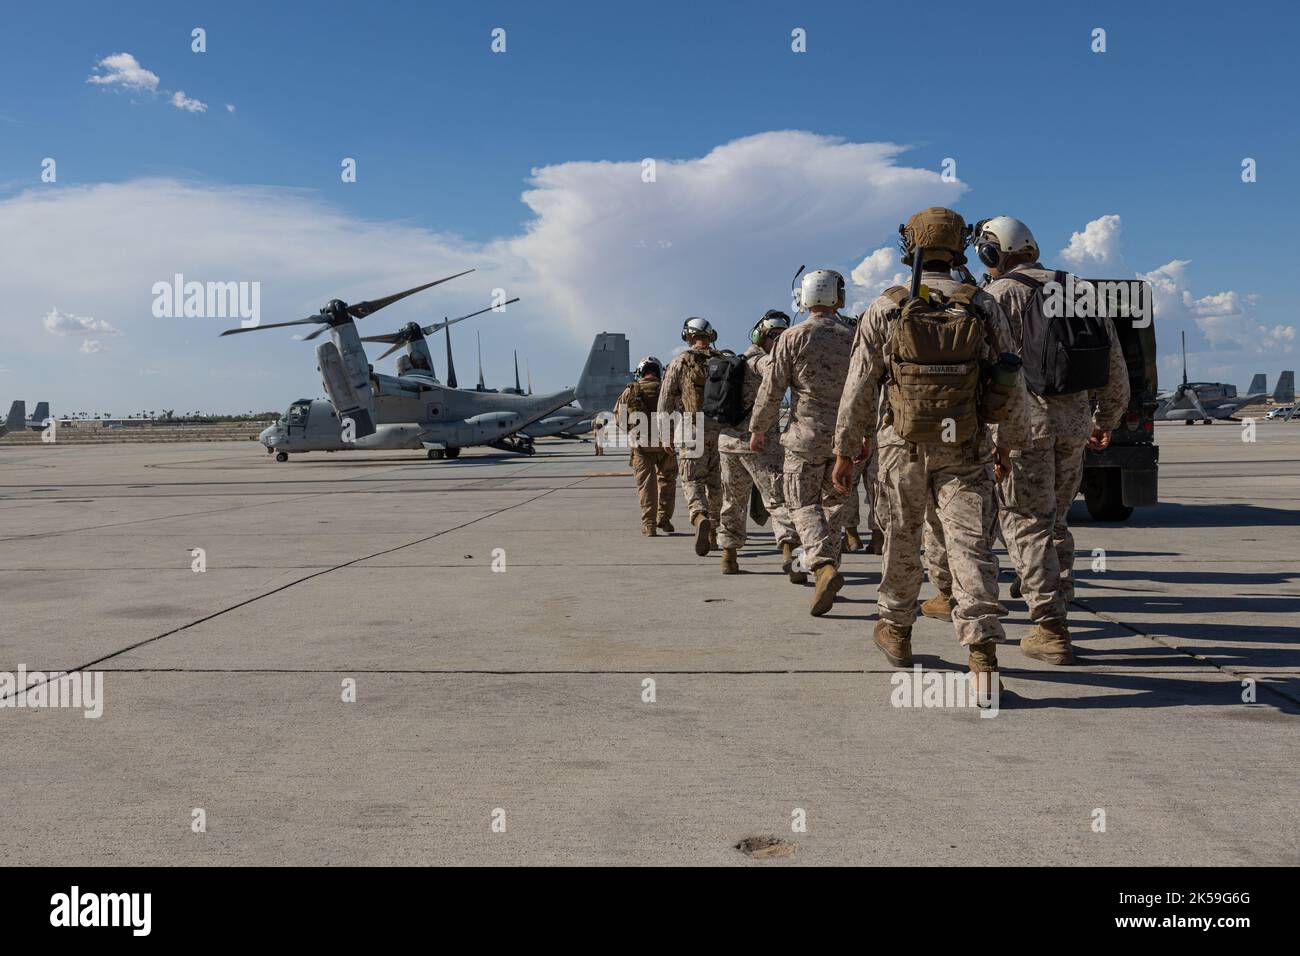 U.S. Marines assigned to Marine Aviation Weapons and Tactics Squadron One (MAWTS-1) prepare to embark an MV-22B Osprey during Weapons and Tactics Instructors (WTI) course 1-23 at Marine Corps Air Station Yuma, Arizona, Oct. 5, 2022. WTI is a seven-week training event hosted by MAWTS-1, providing standardized advanced tactical training and certification of unit instructor qualifications to support Marine aviation training and readiness, and assists in developing and employing aviation weapons and tactics. (U.S. Marine Corps photo by Lance Cpl. Kyle Chan) Stock Photo